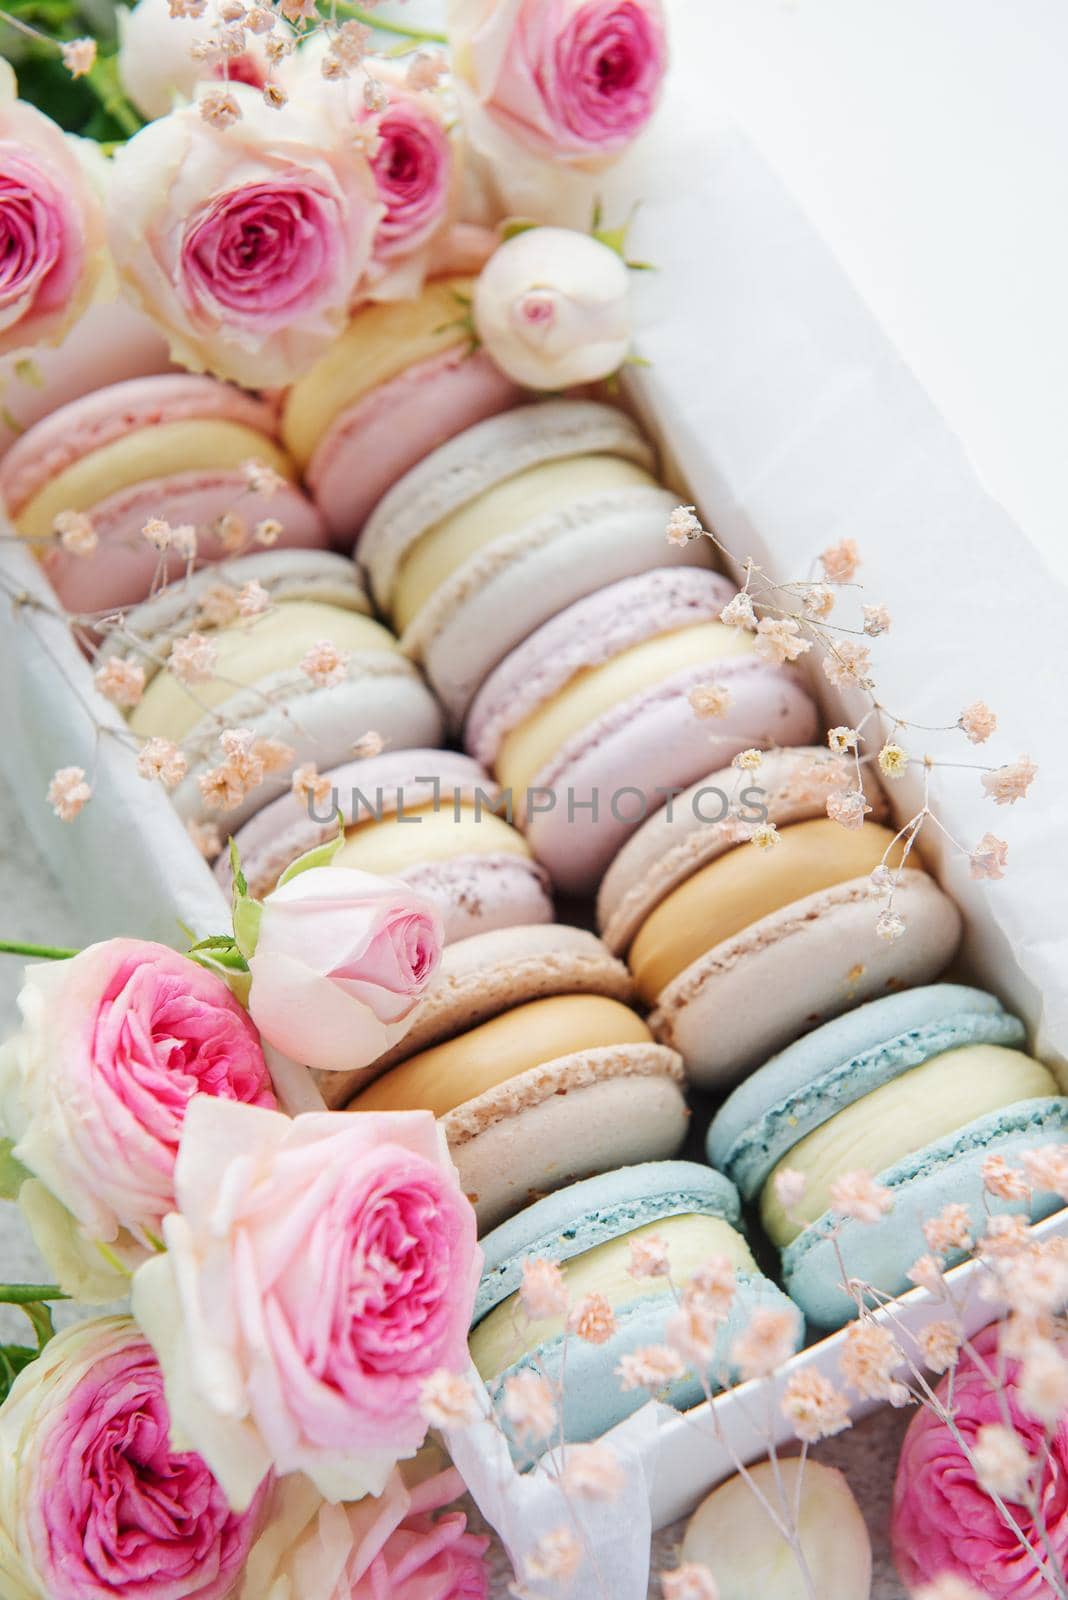 Box with delicious colorful macaroons and rose flowers.